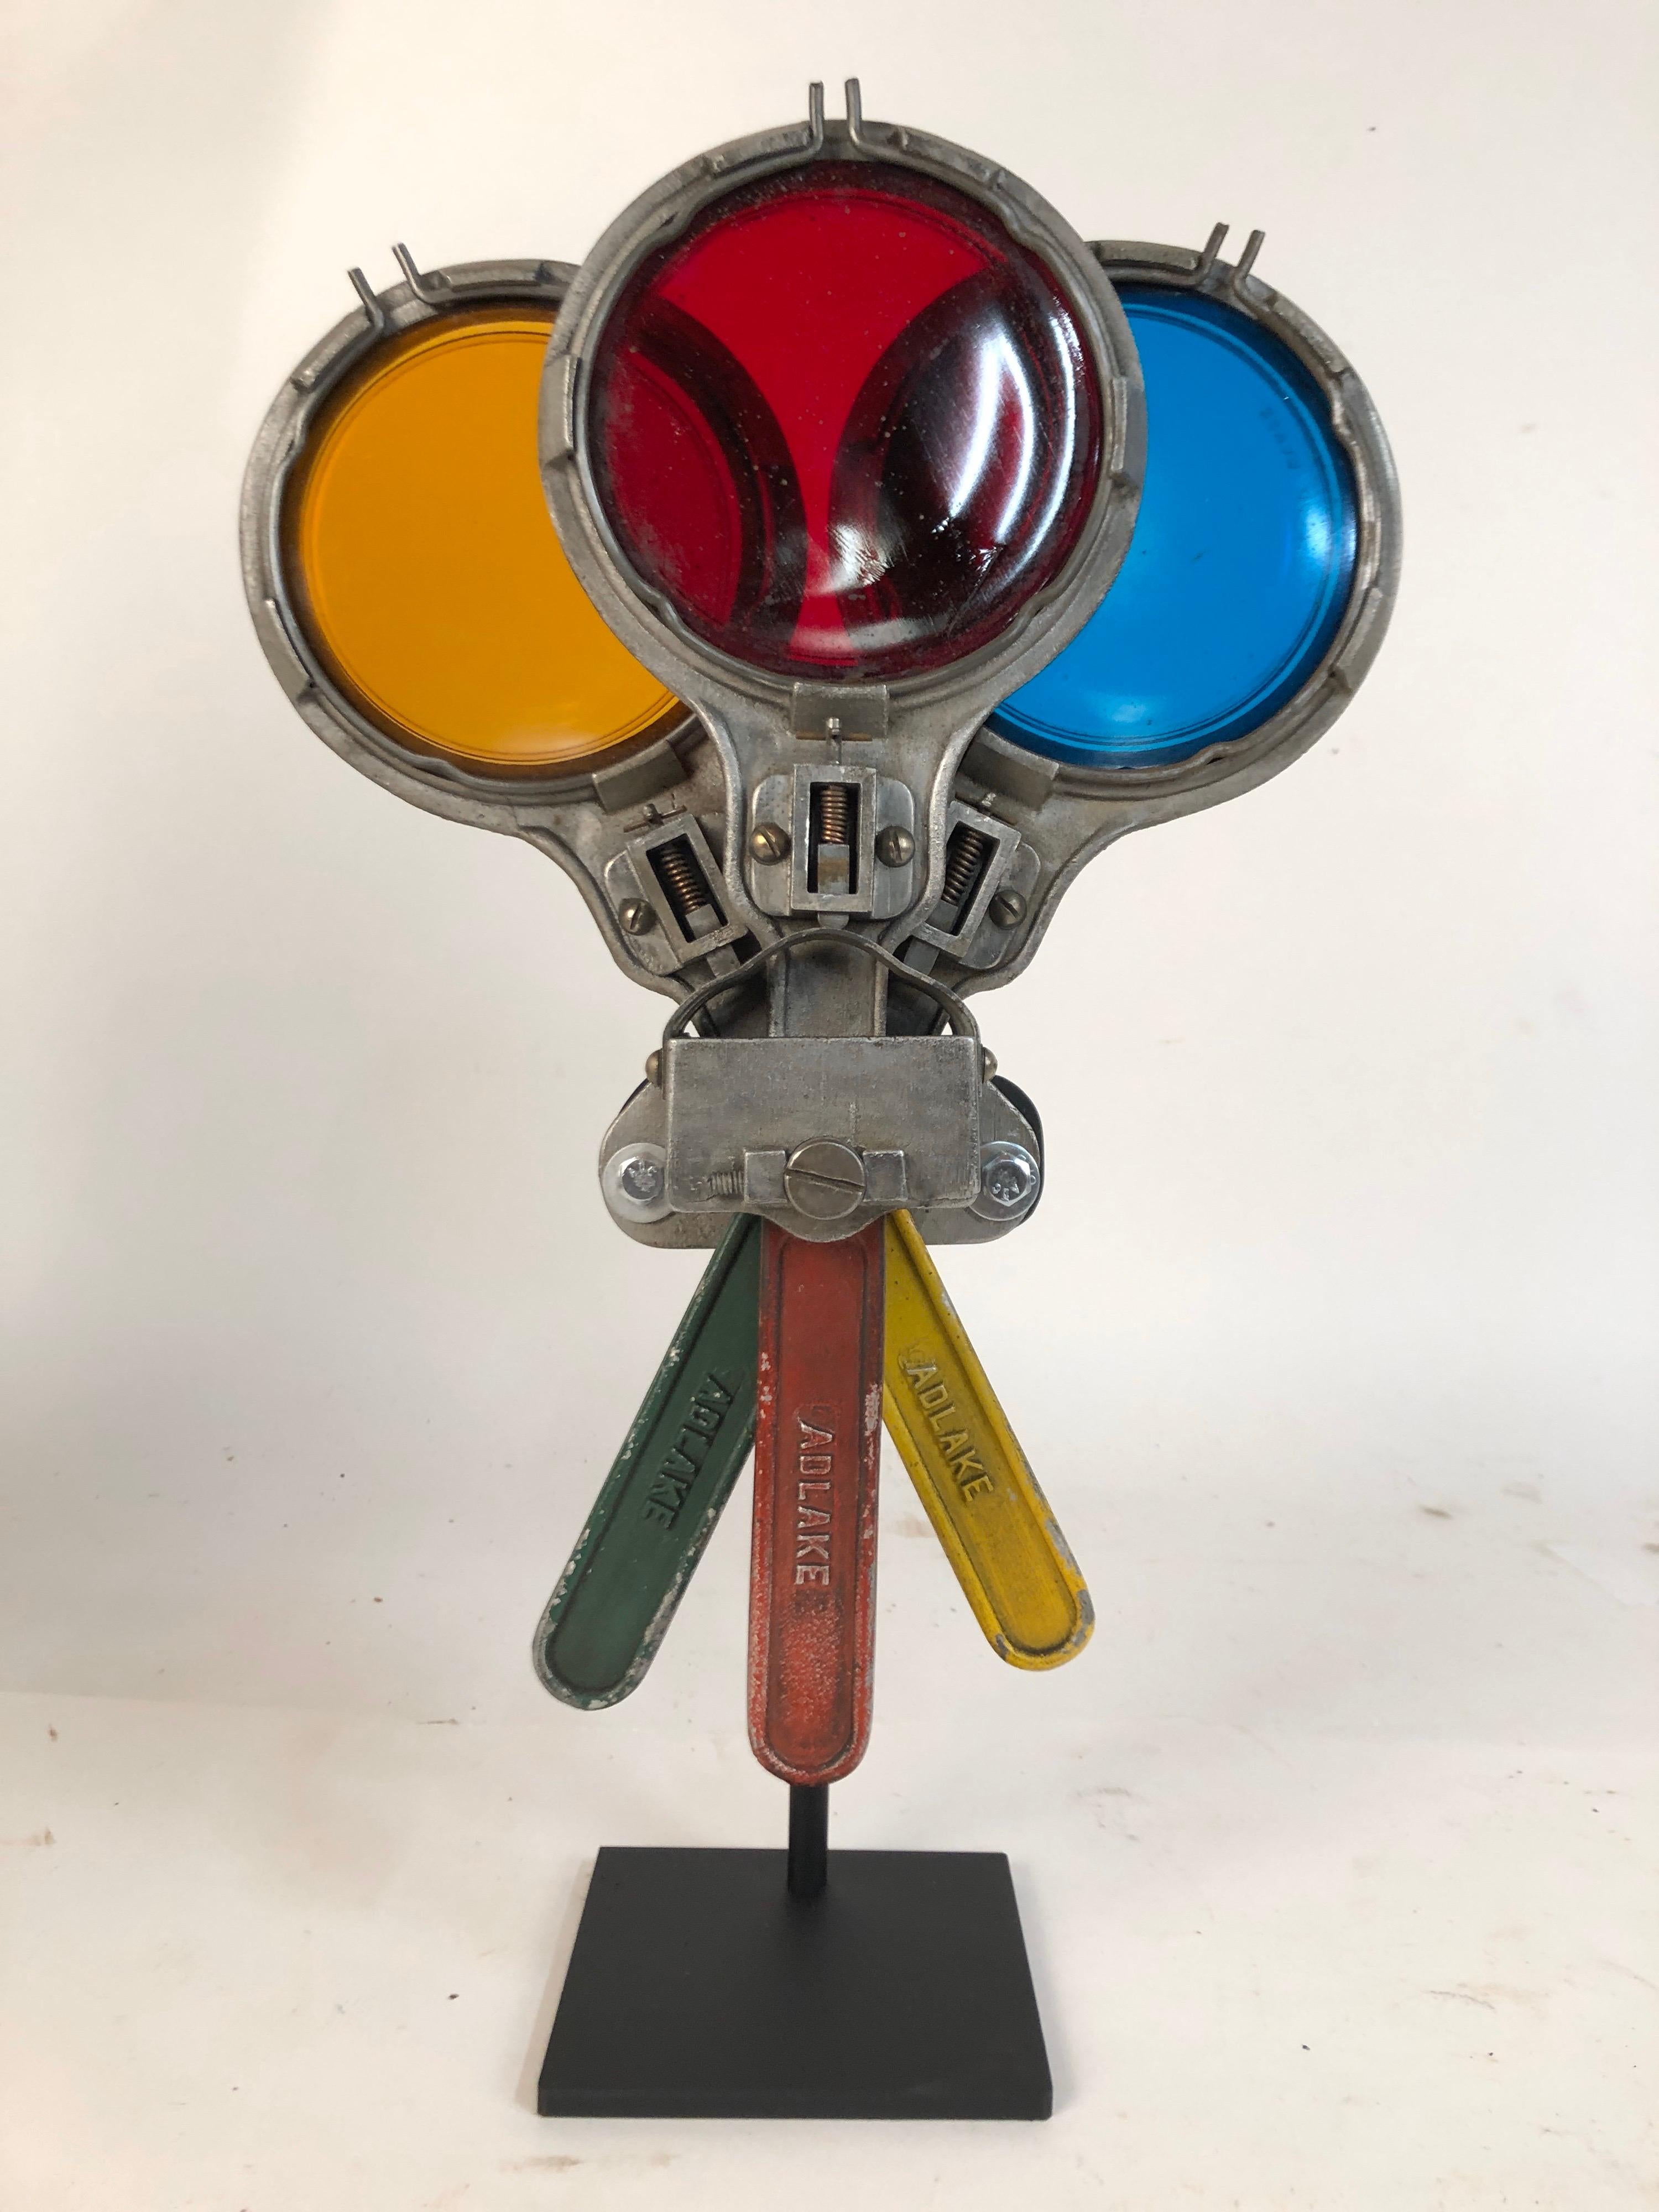 A circa 1940s antique New York City subway semaphore. Three glass colored lens. Yellow, red and green. Mounted on a custom steel stand. Arms can be adjusted several ways. Total height 16